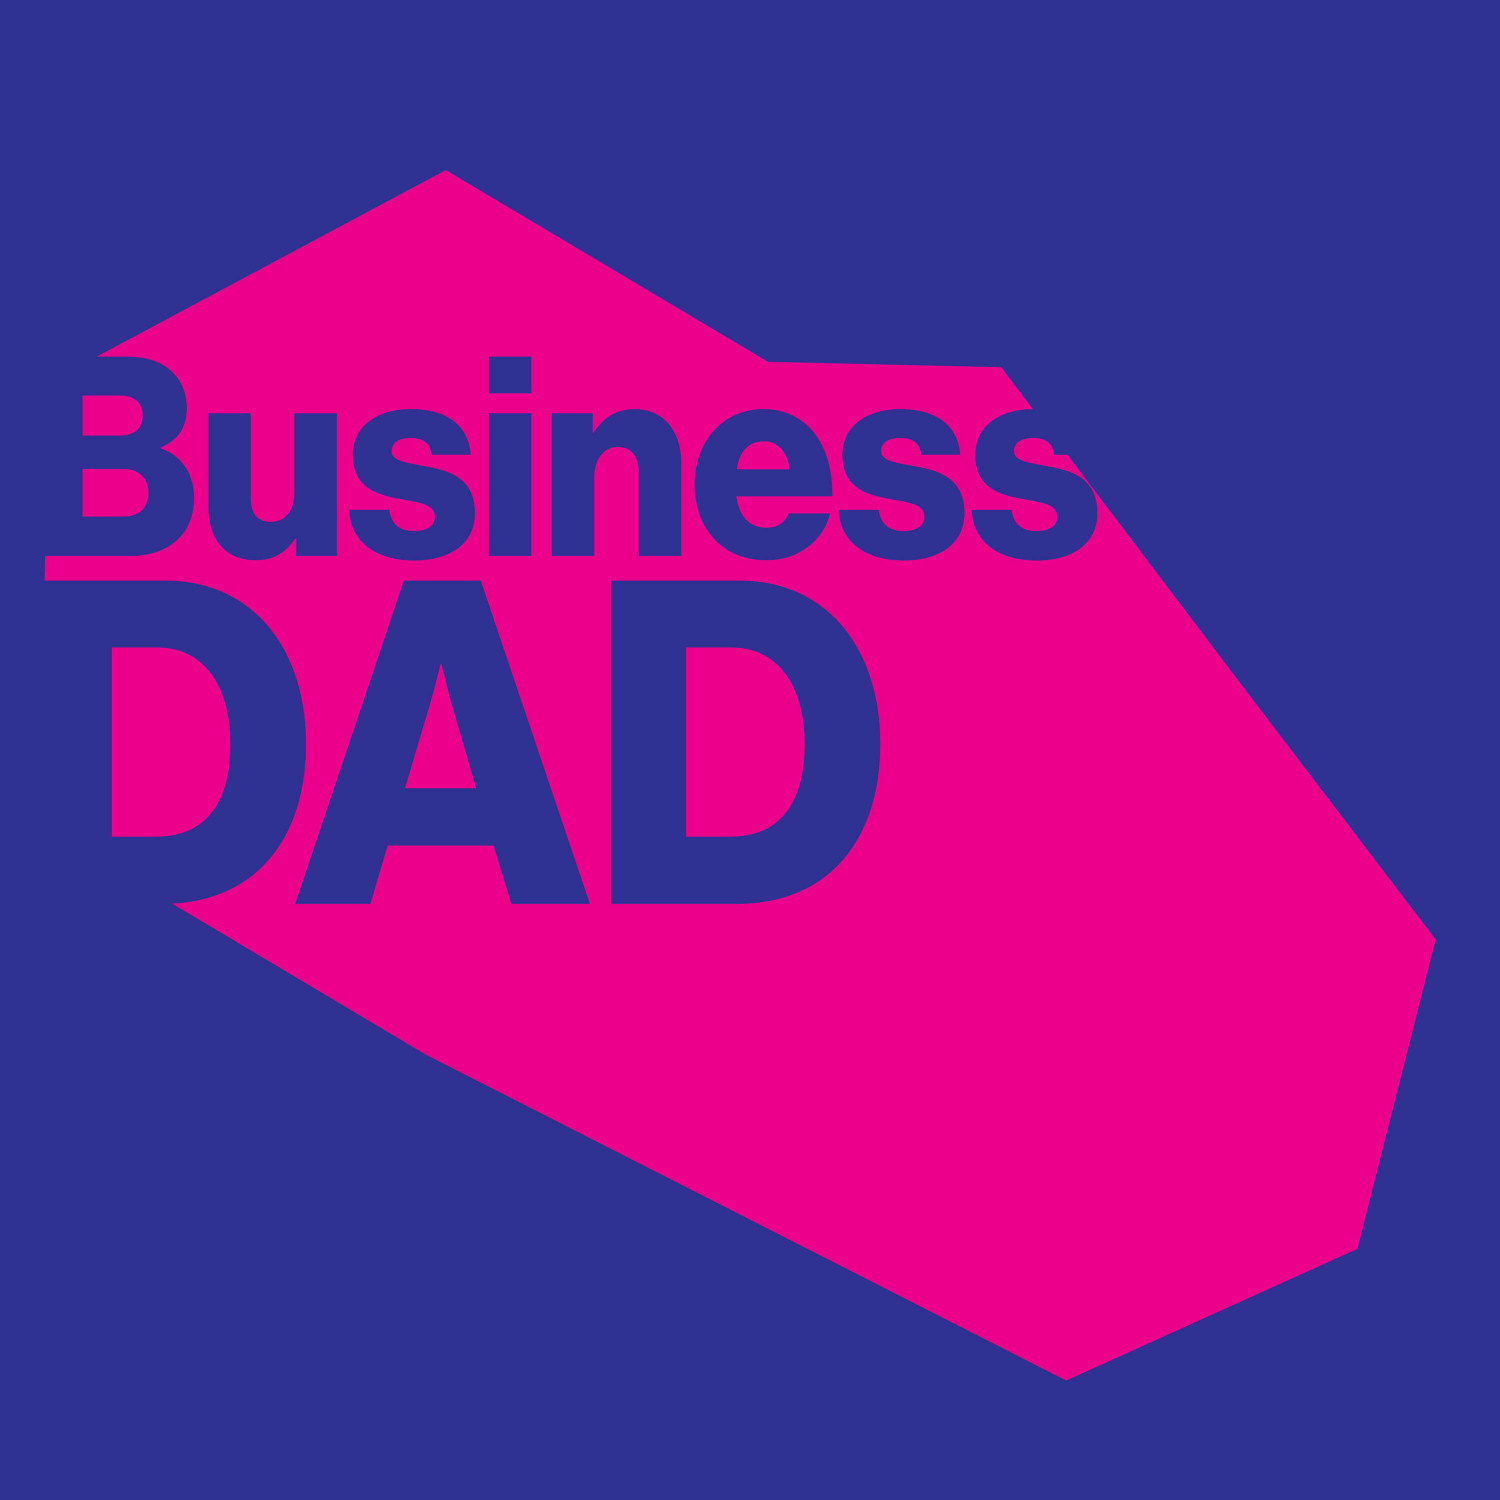 Alexis Ohanian's podcast: Business Dad